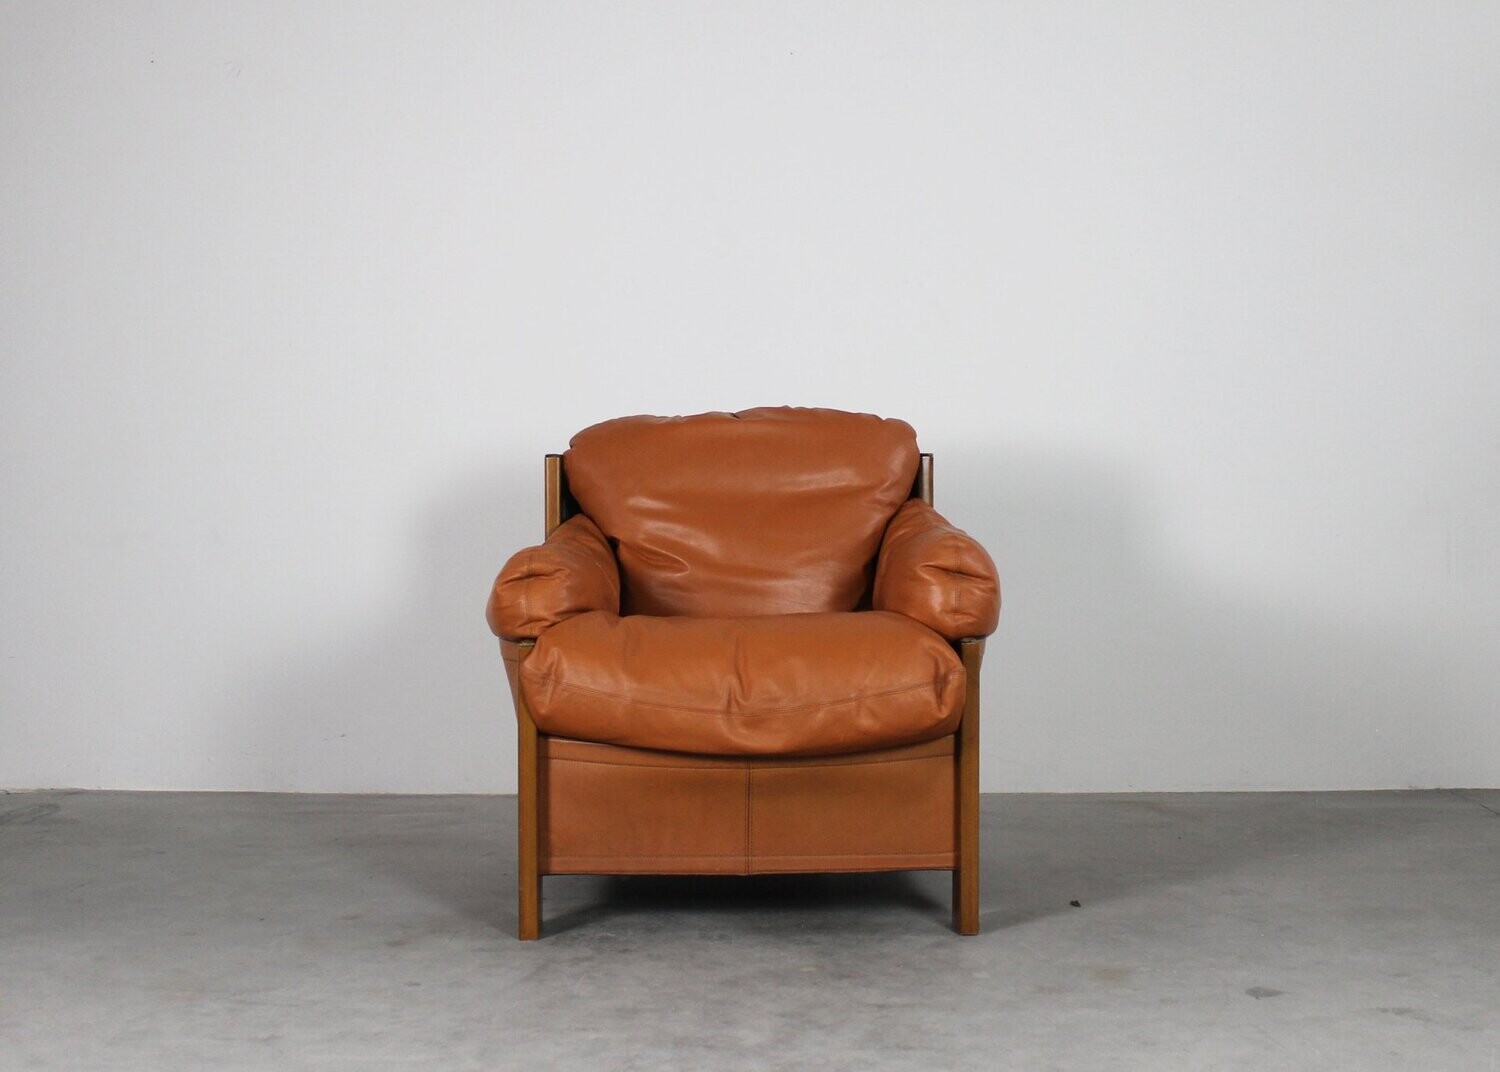 Tobia & Afra Scarpa Armchair in Wood and Leather by Maxalto 1975